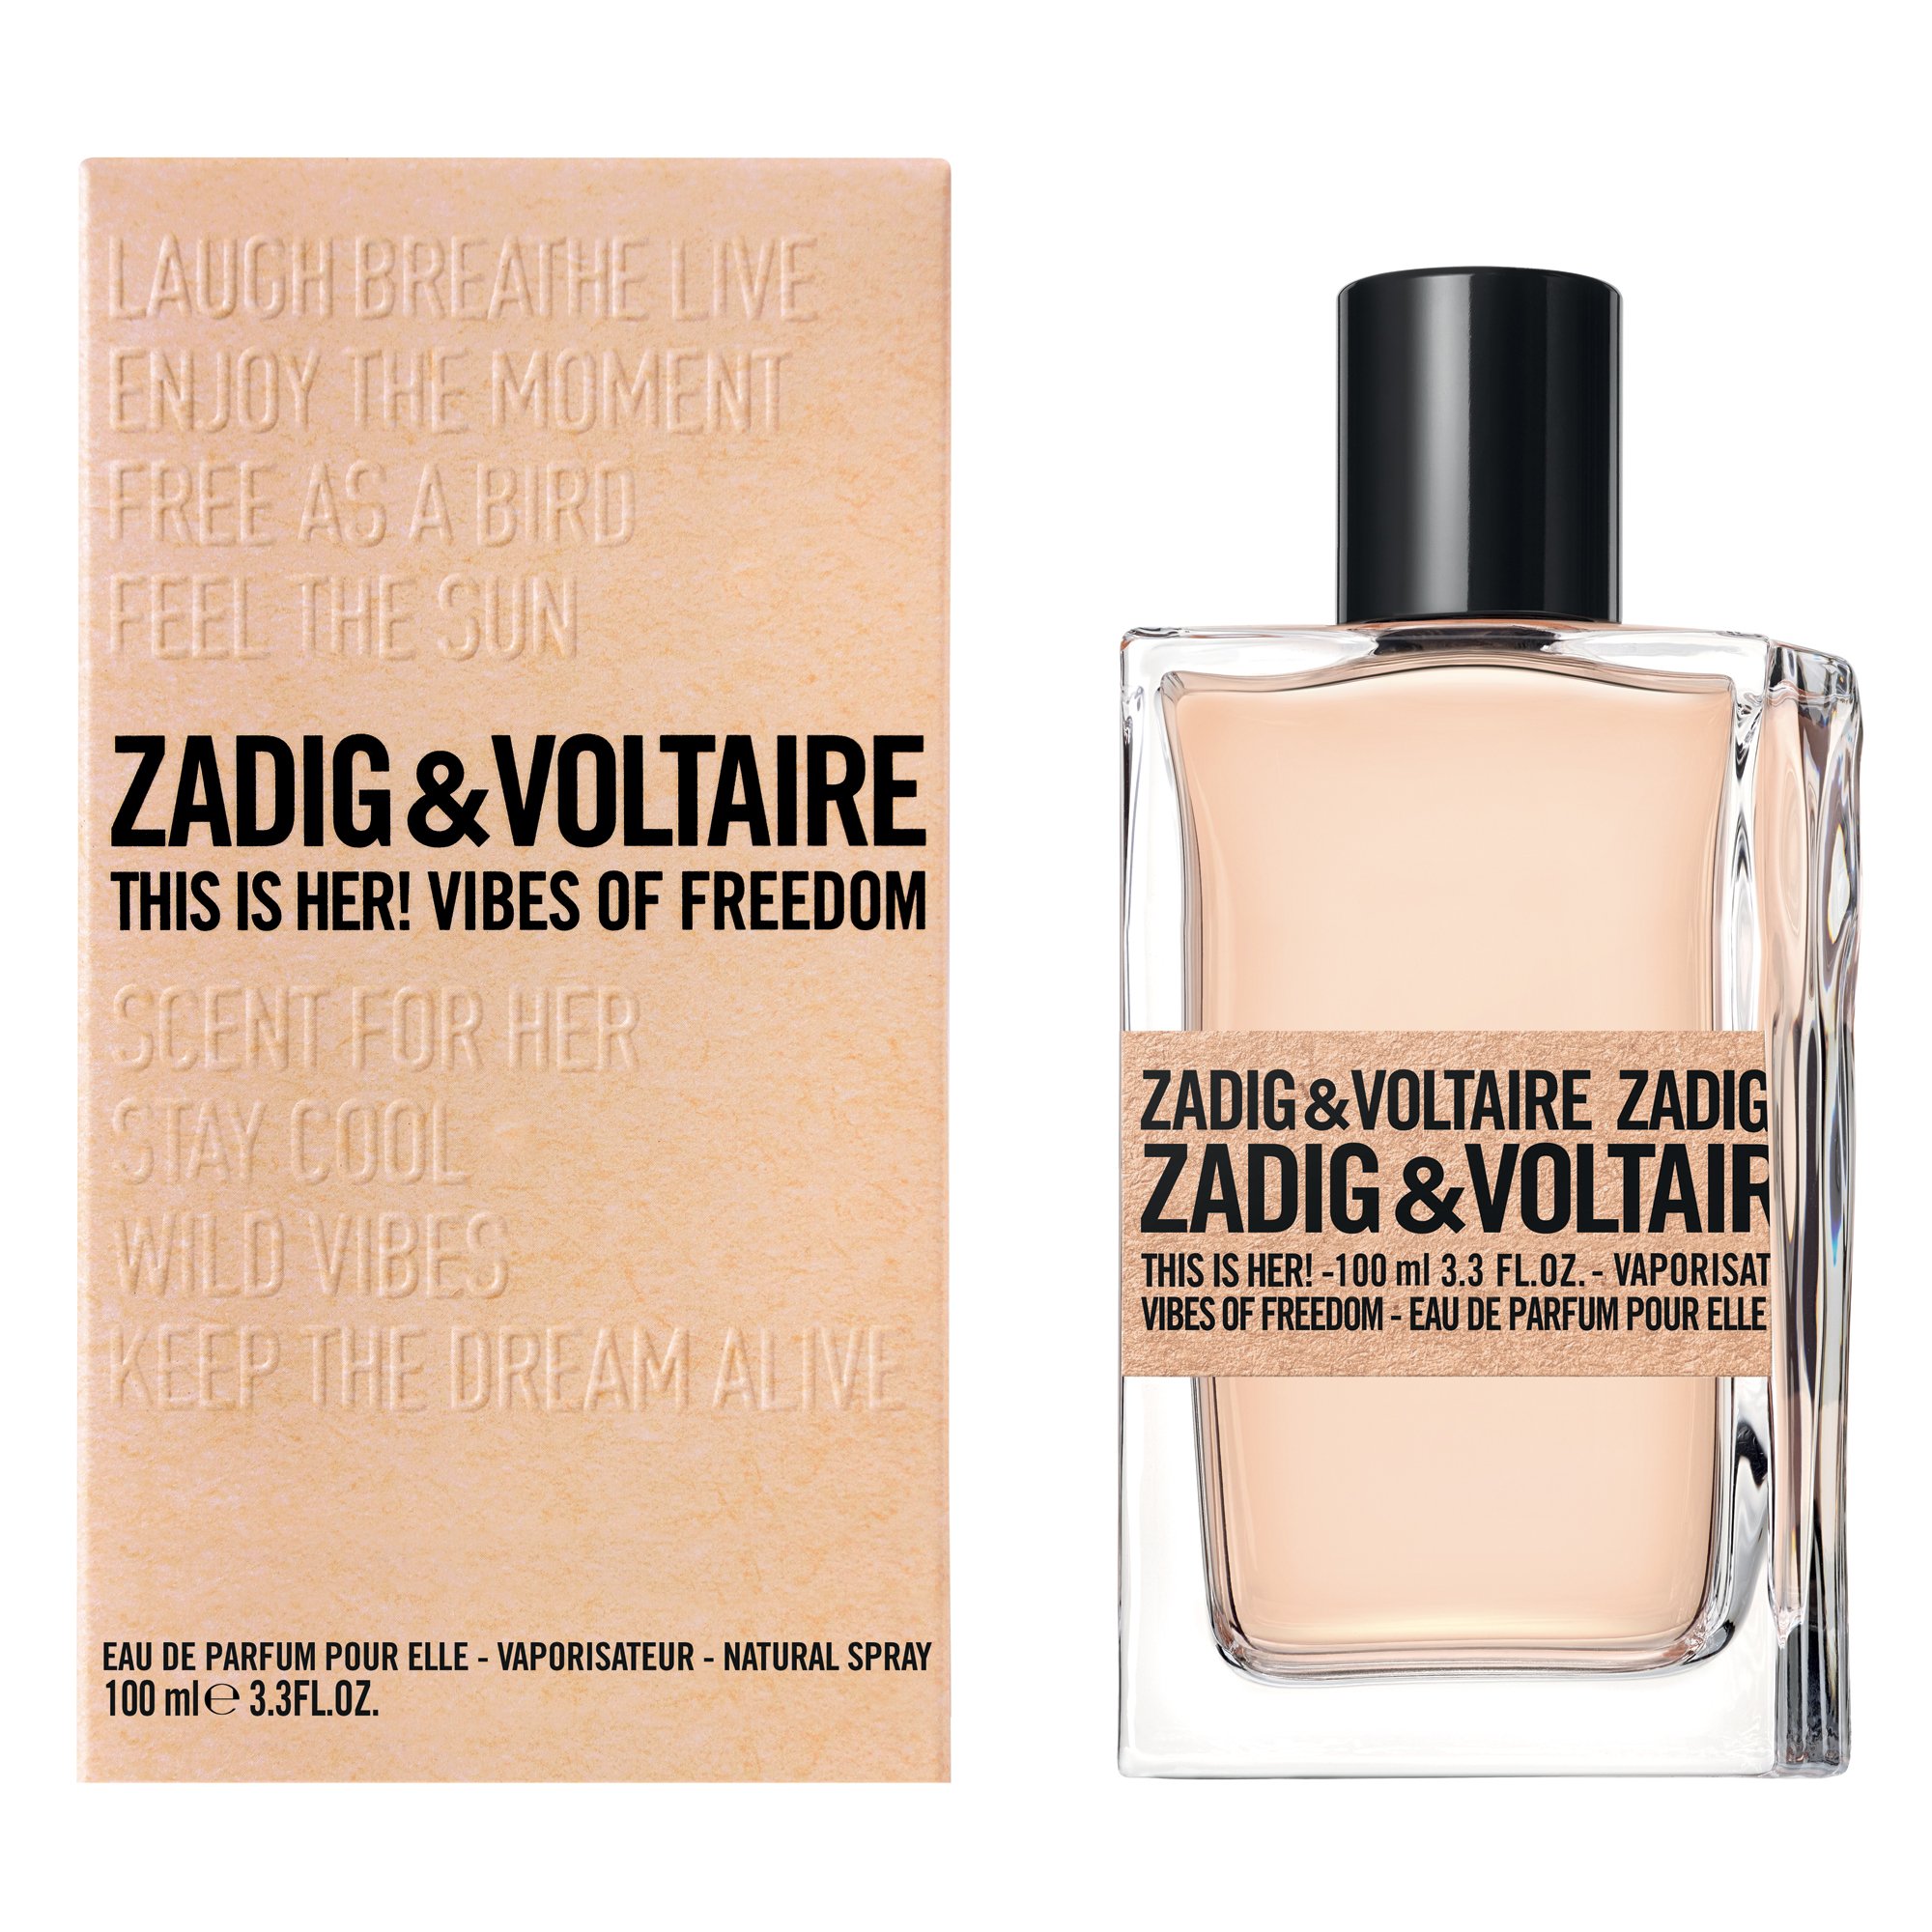 She vibe. Духи Zadig Voltaire Vibes of Freedom. Туалетная вода Zadig Voltaire для женщин. Zadig & Voltaire this is her! Vibes of Freedom EDP (100 мл, тестер). Духи Zadig Voltaire this is her.